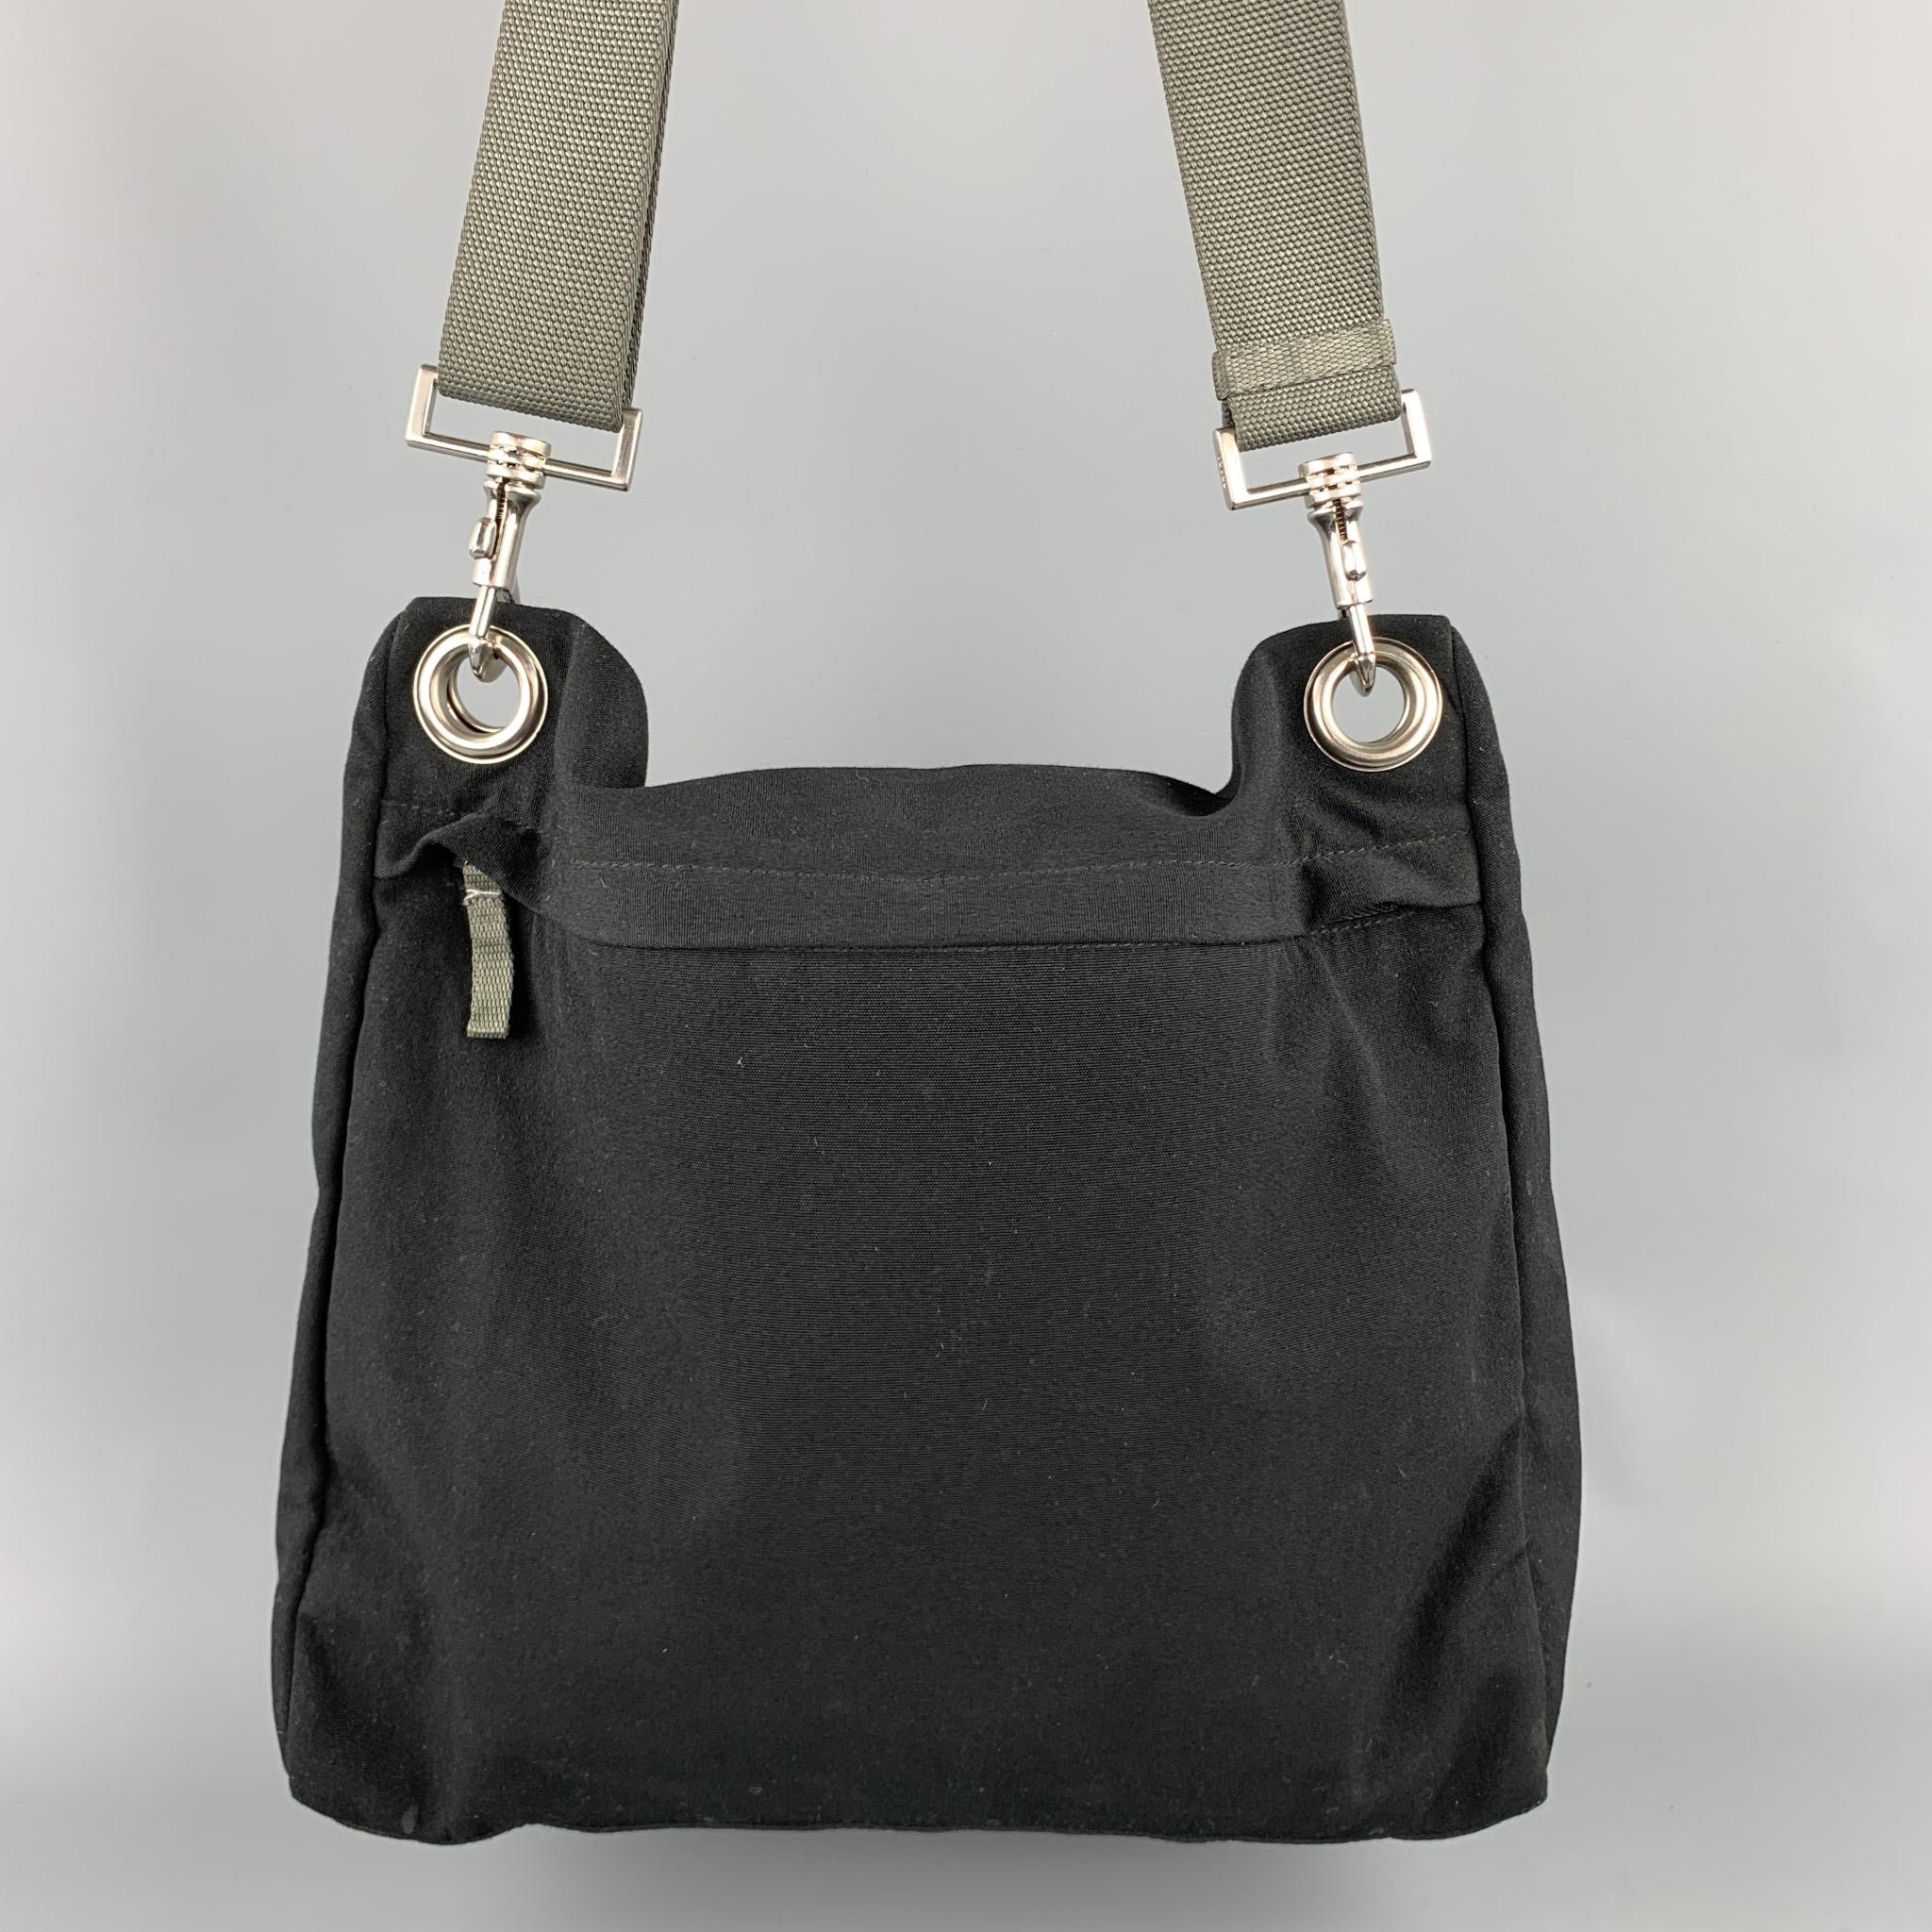 PRADA messenger handbag comes in a black canvas with a gray removable shoulder strap featuring a inner zipper pocket and a zip up closure. Made in Italy.

Very Good Pre-Owned Condition.

Measurements:

Length: 13 in. 
Width: 5 in. 
Height: 12 in.